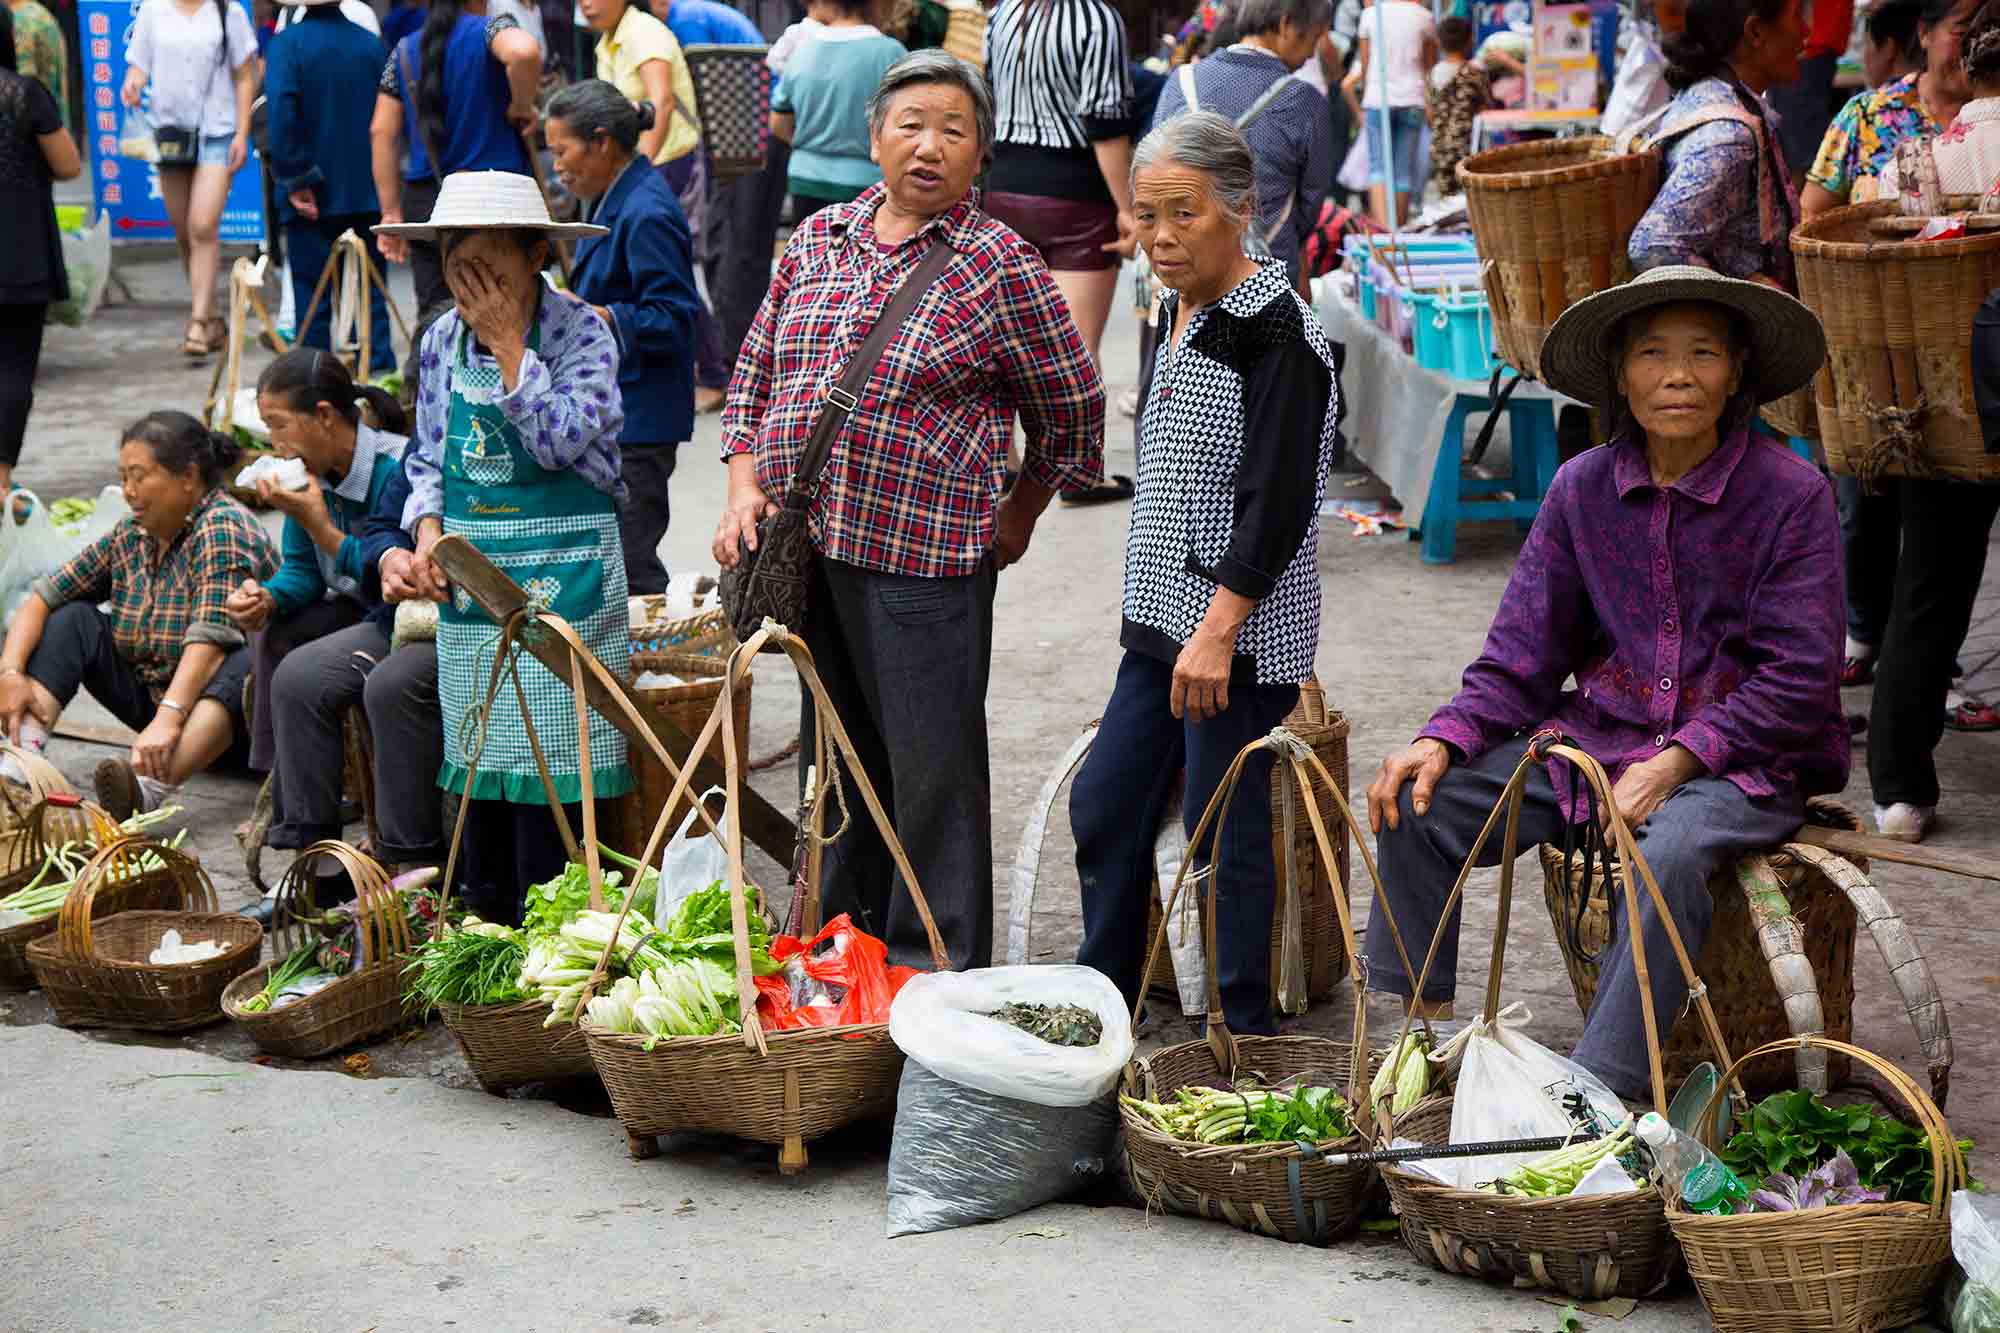 Market scene in Luobiao, China. © ULLI MAIER & NISA MAIER